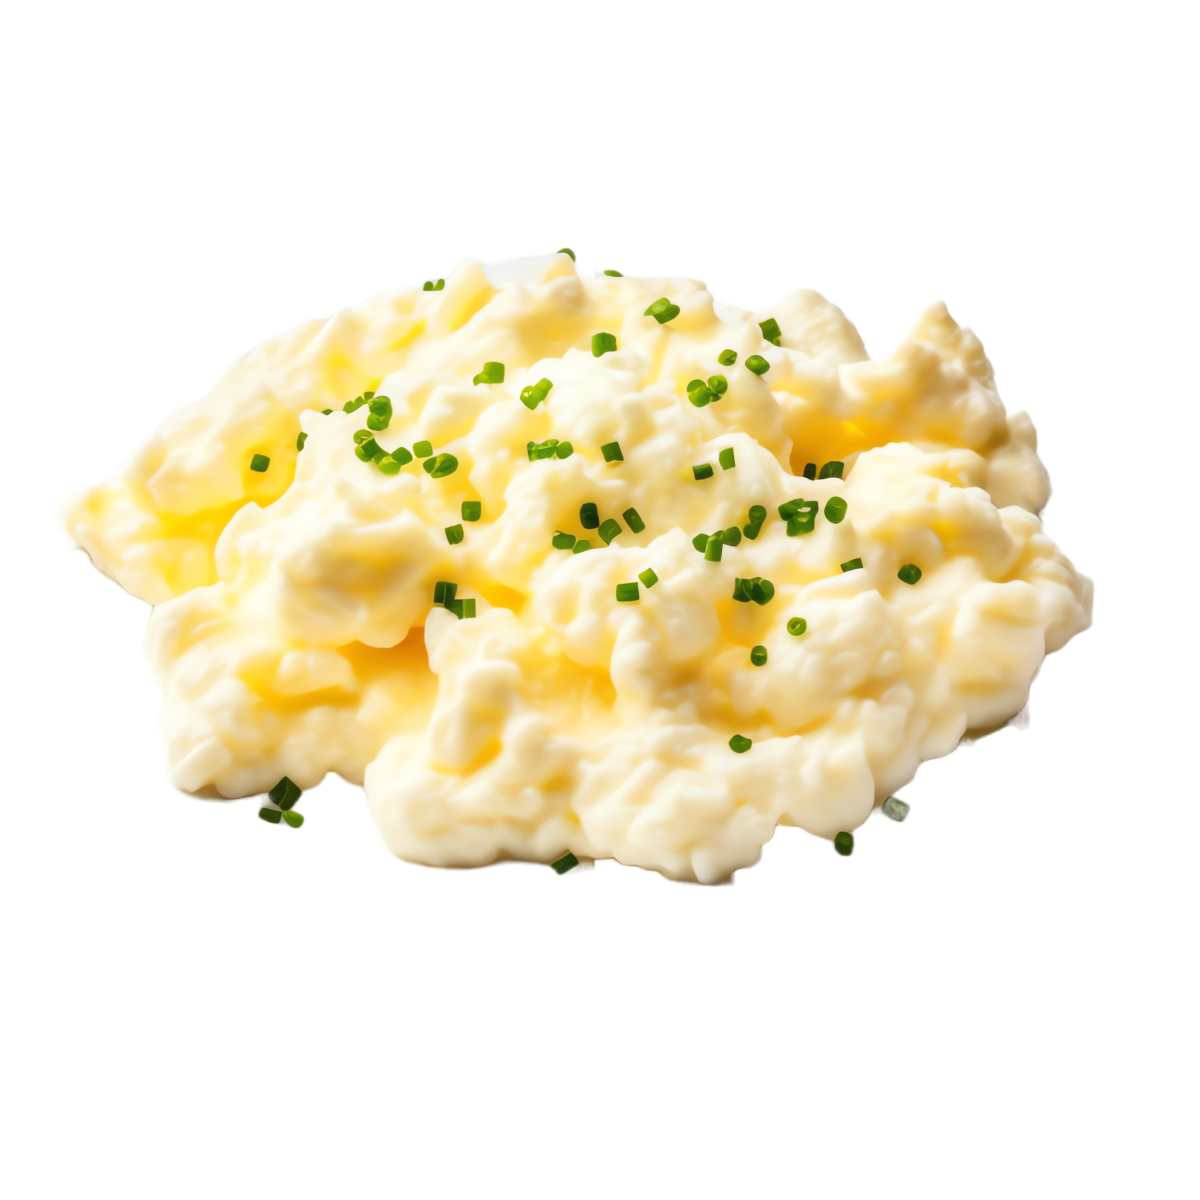 Soft scrambled eggs on a white background with chives on top.